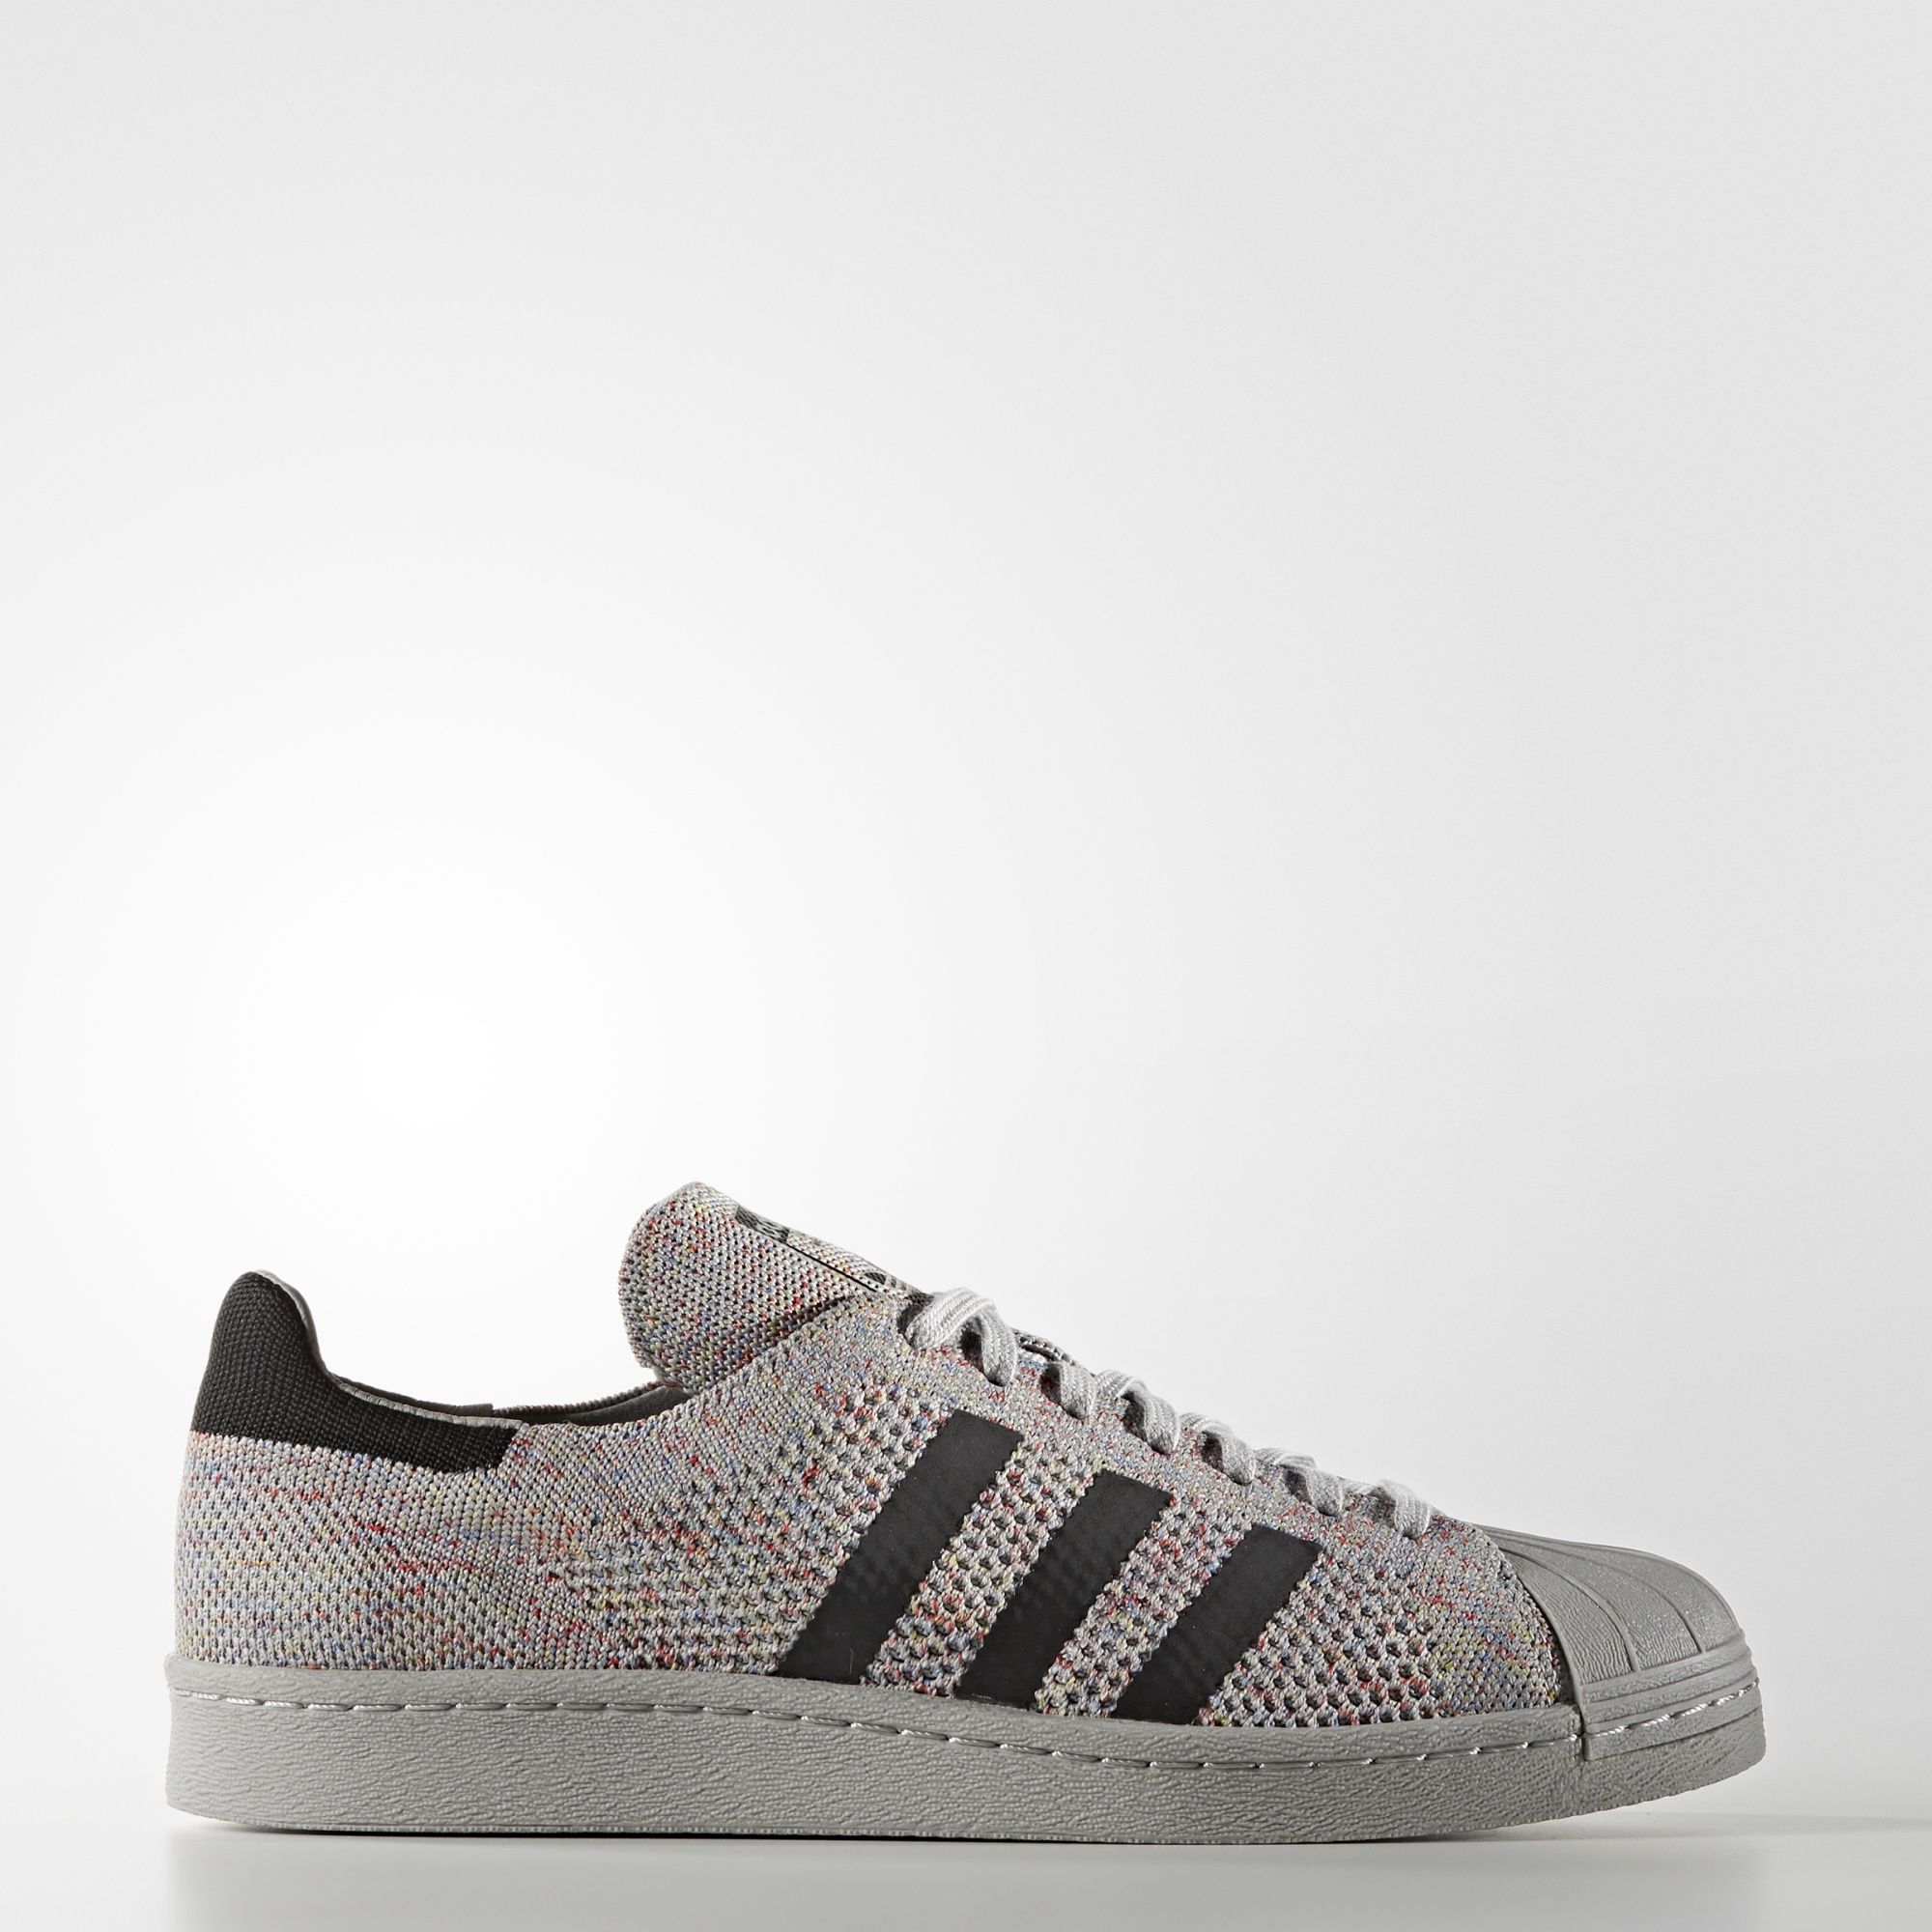 The Superstar 80s is Now Available in Primeknit-1